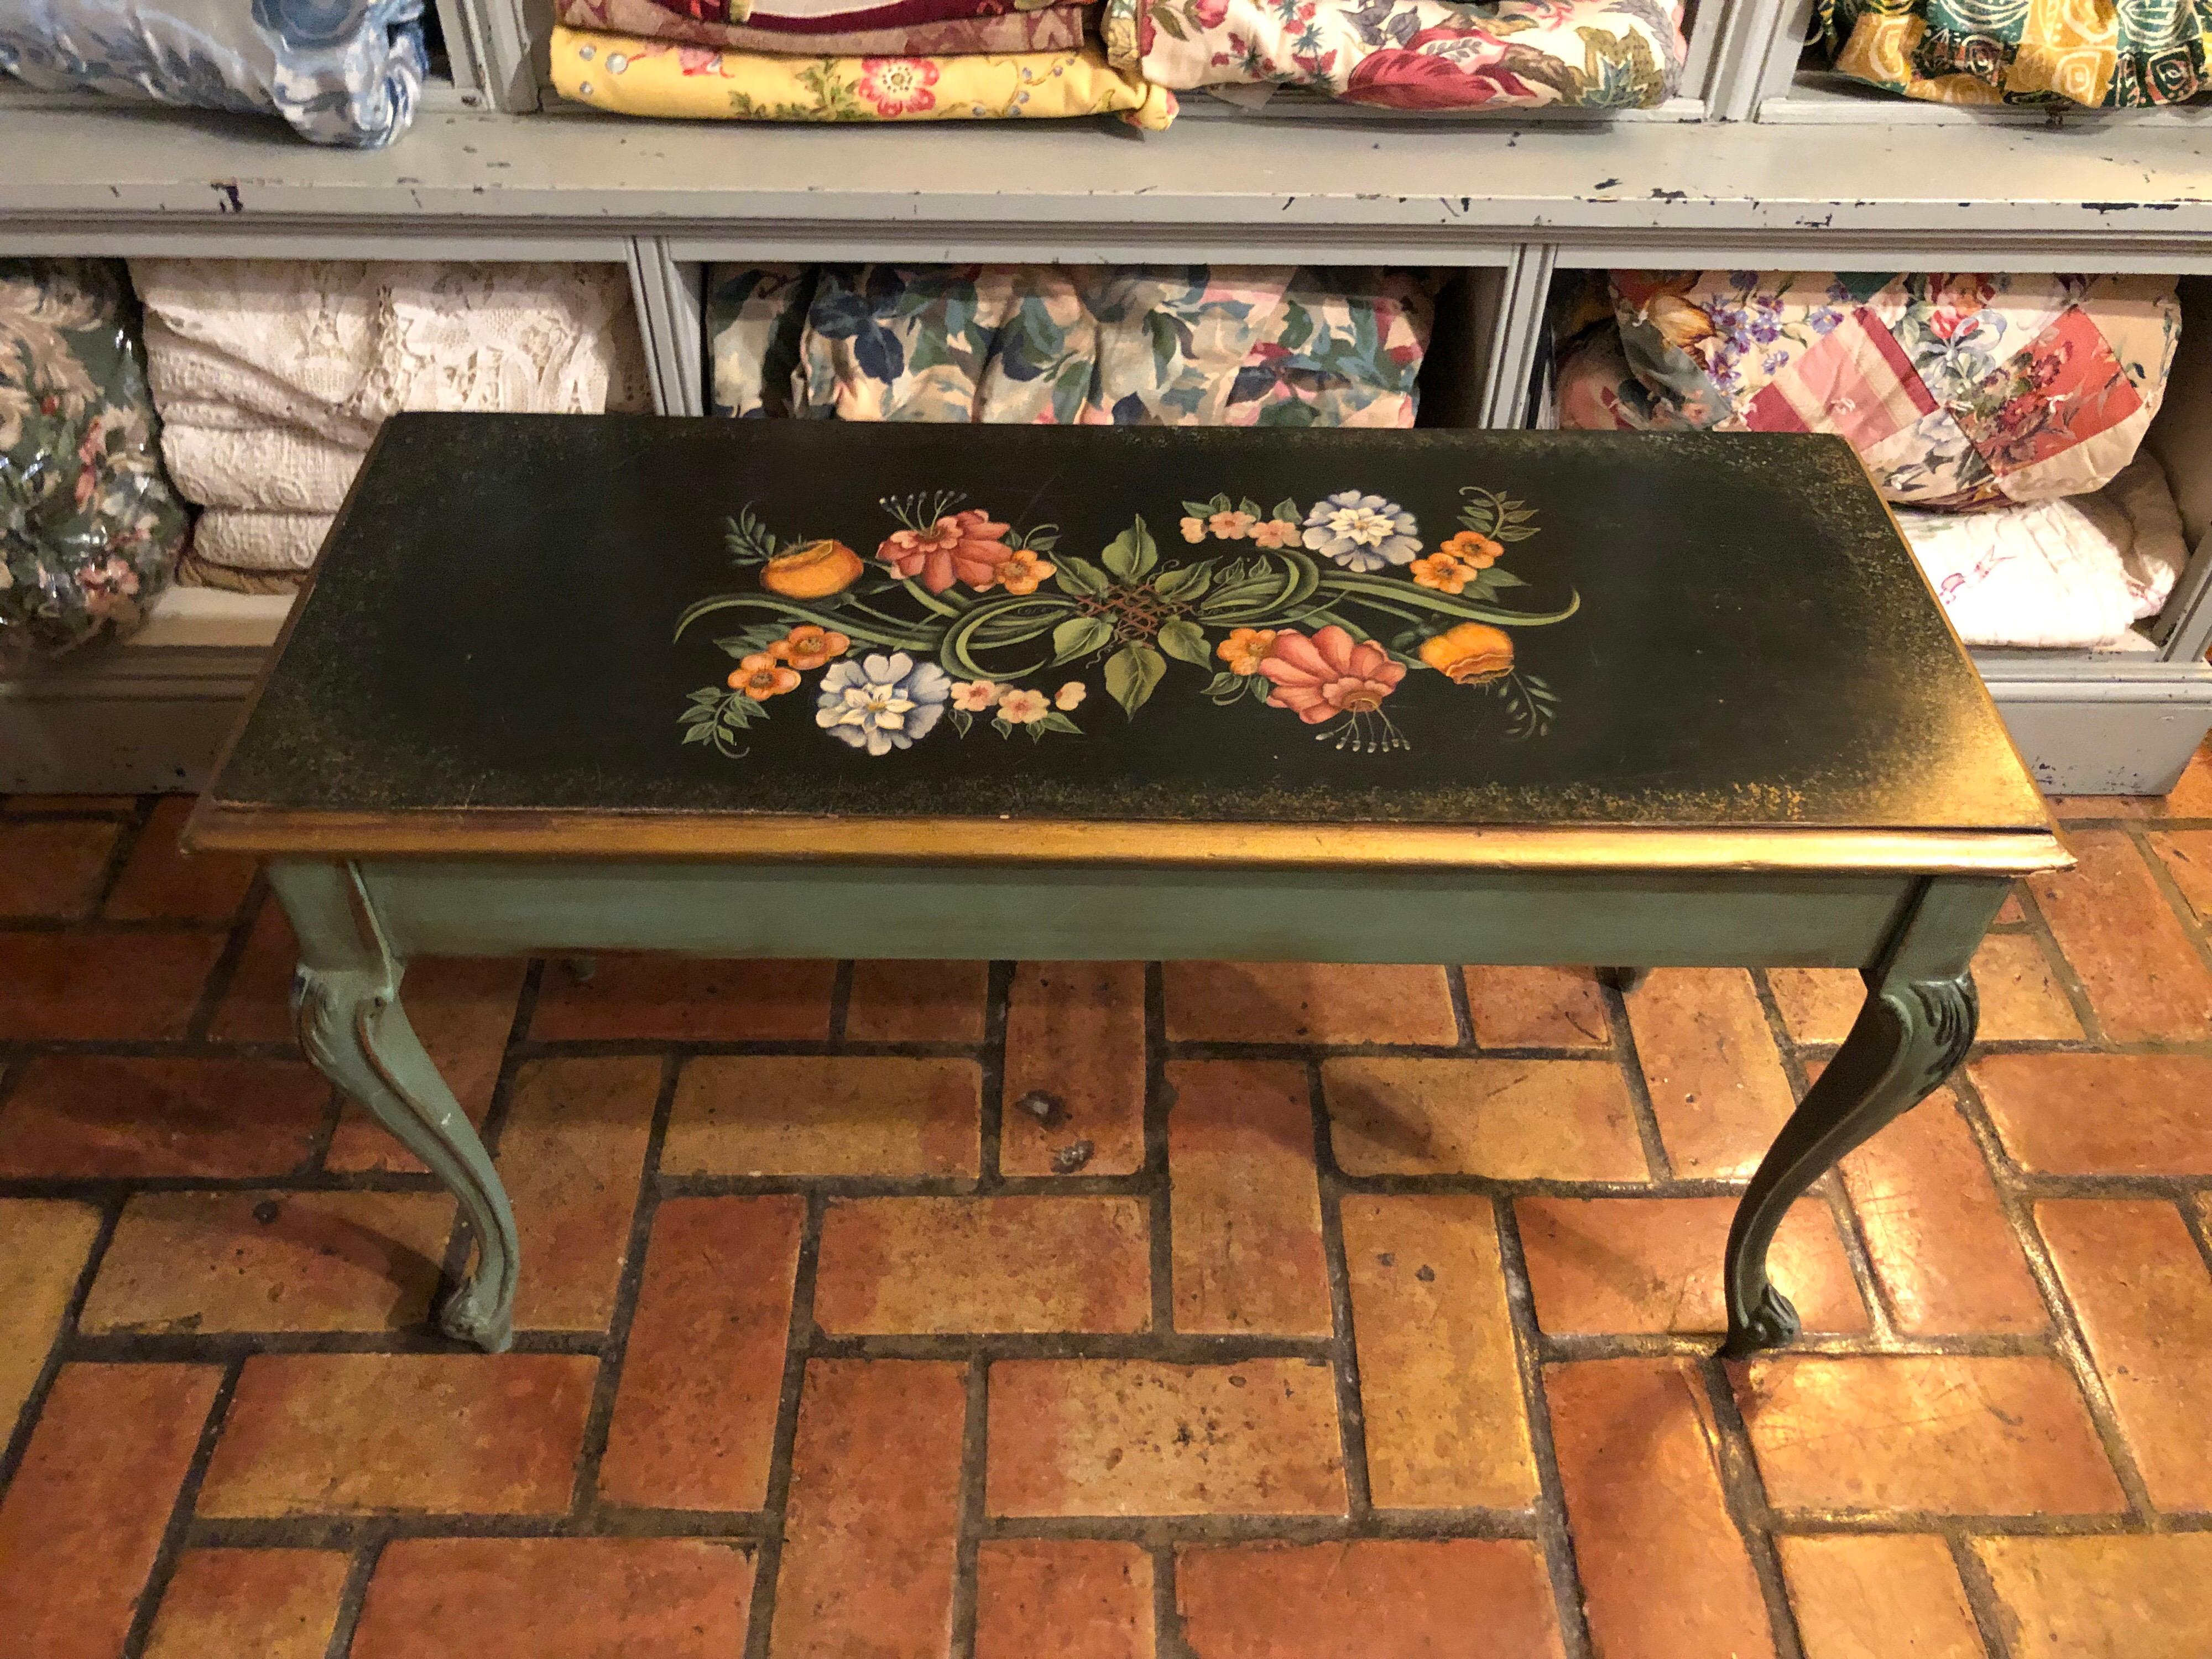 Vintage Hand Painted Piano Bench. Gorgeous floral hand painted top and feminine cabriolet legs. Perfect for at the foot of a bed or piano. Sheet music or magazine storage inside.